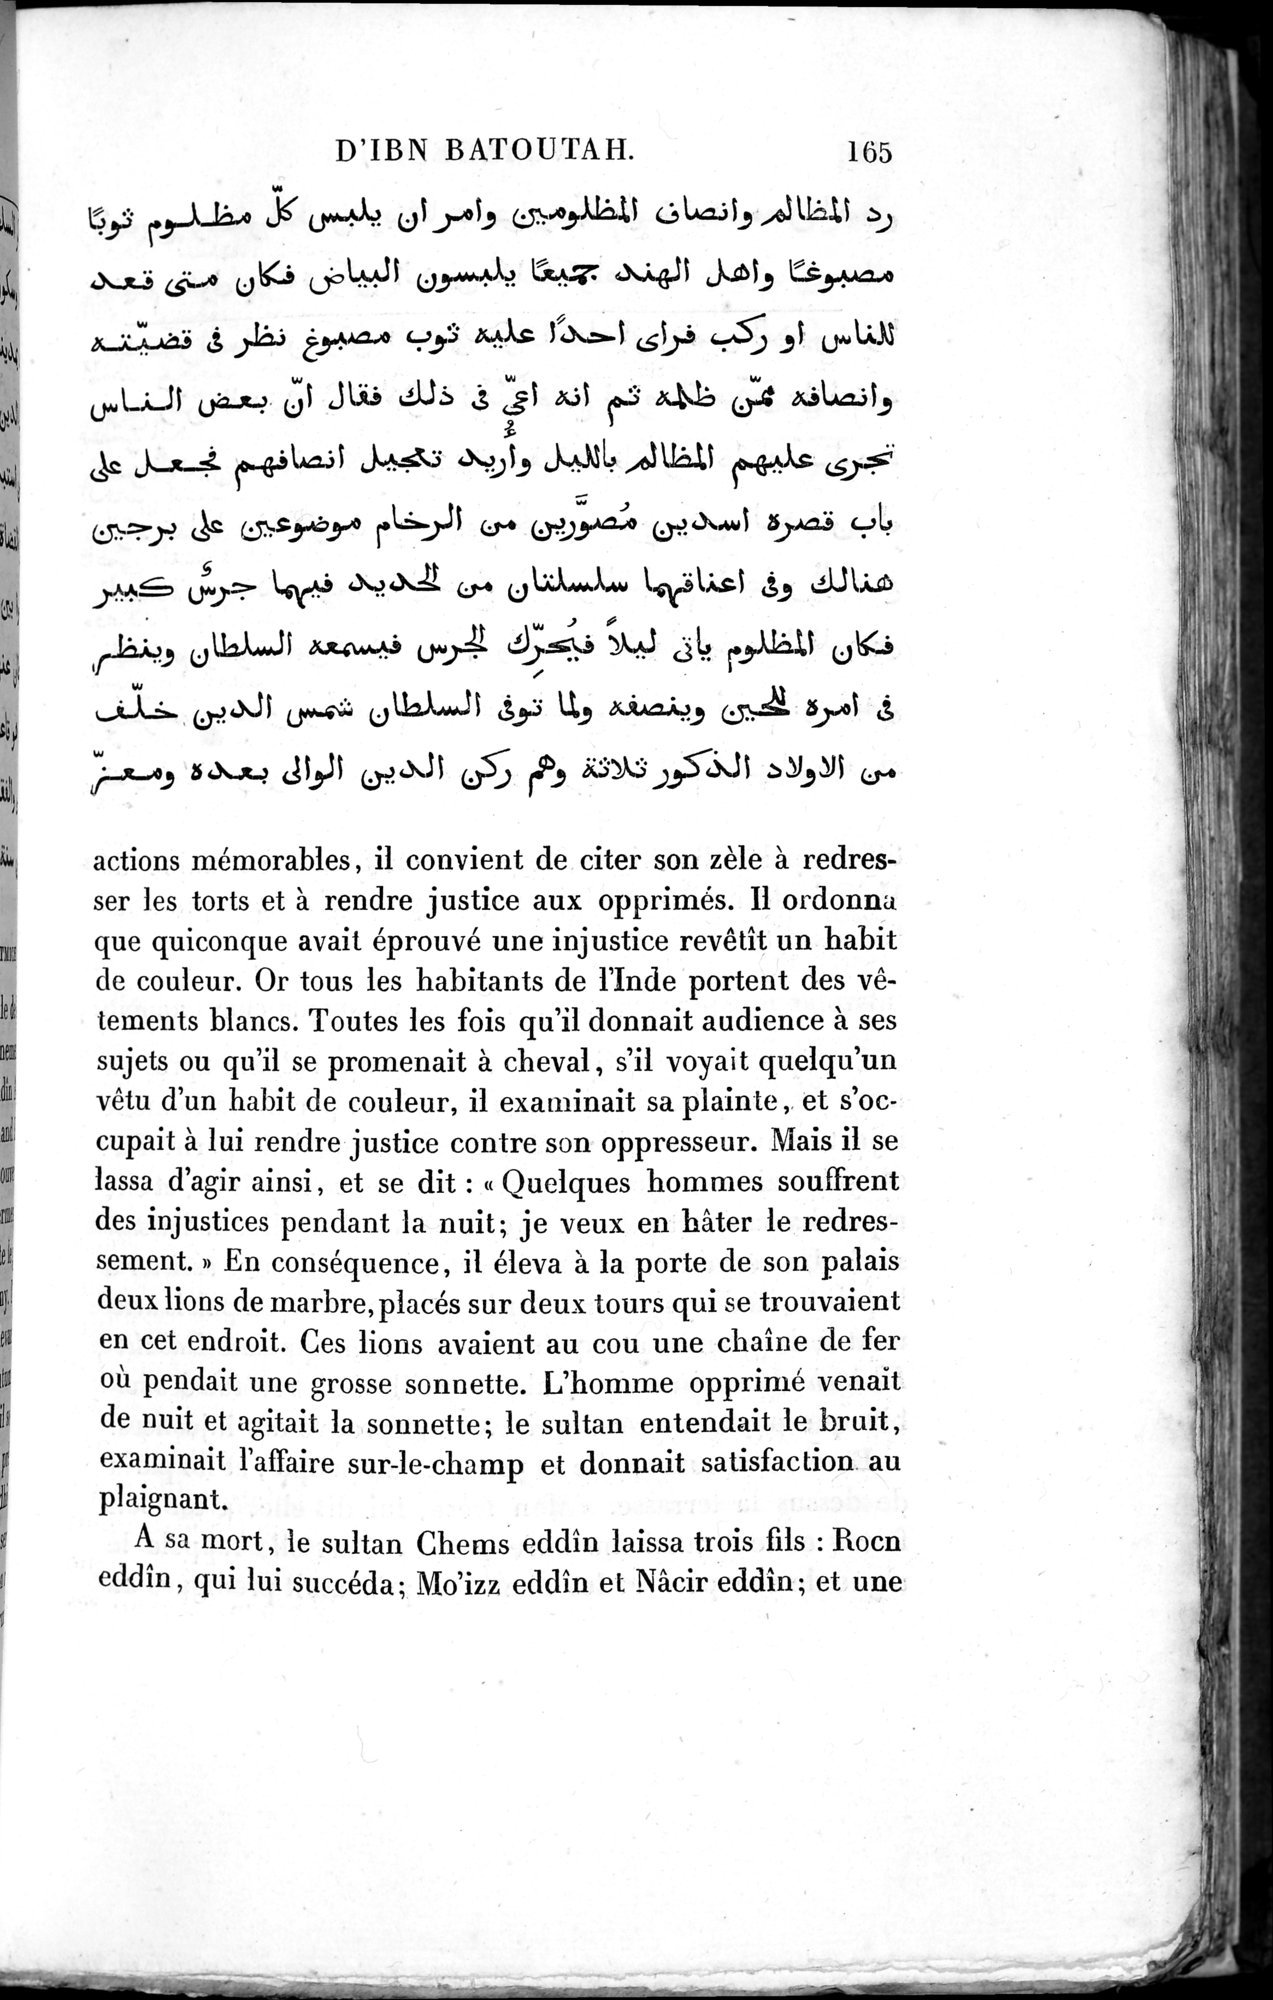 Voyages d'Ibn Batoutah : vol.3 / Page 205 (Grayscale High Resolution Image)